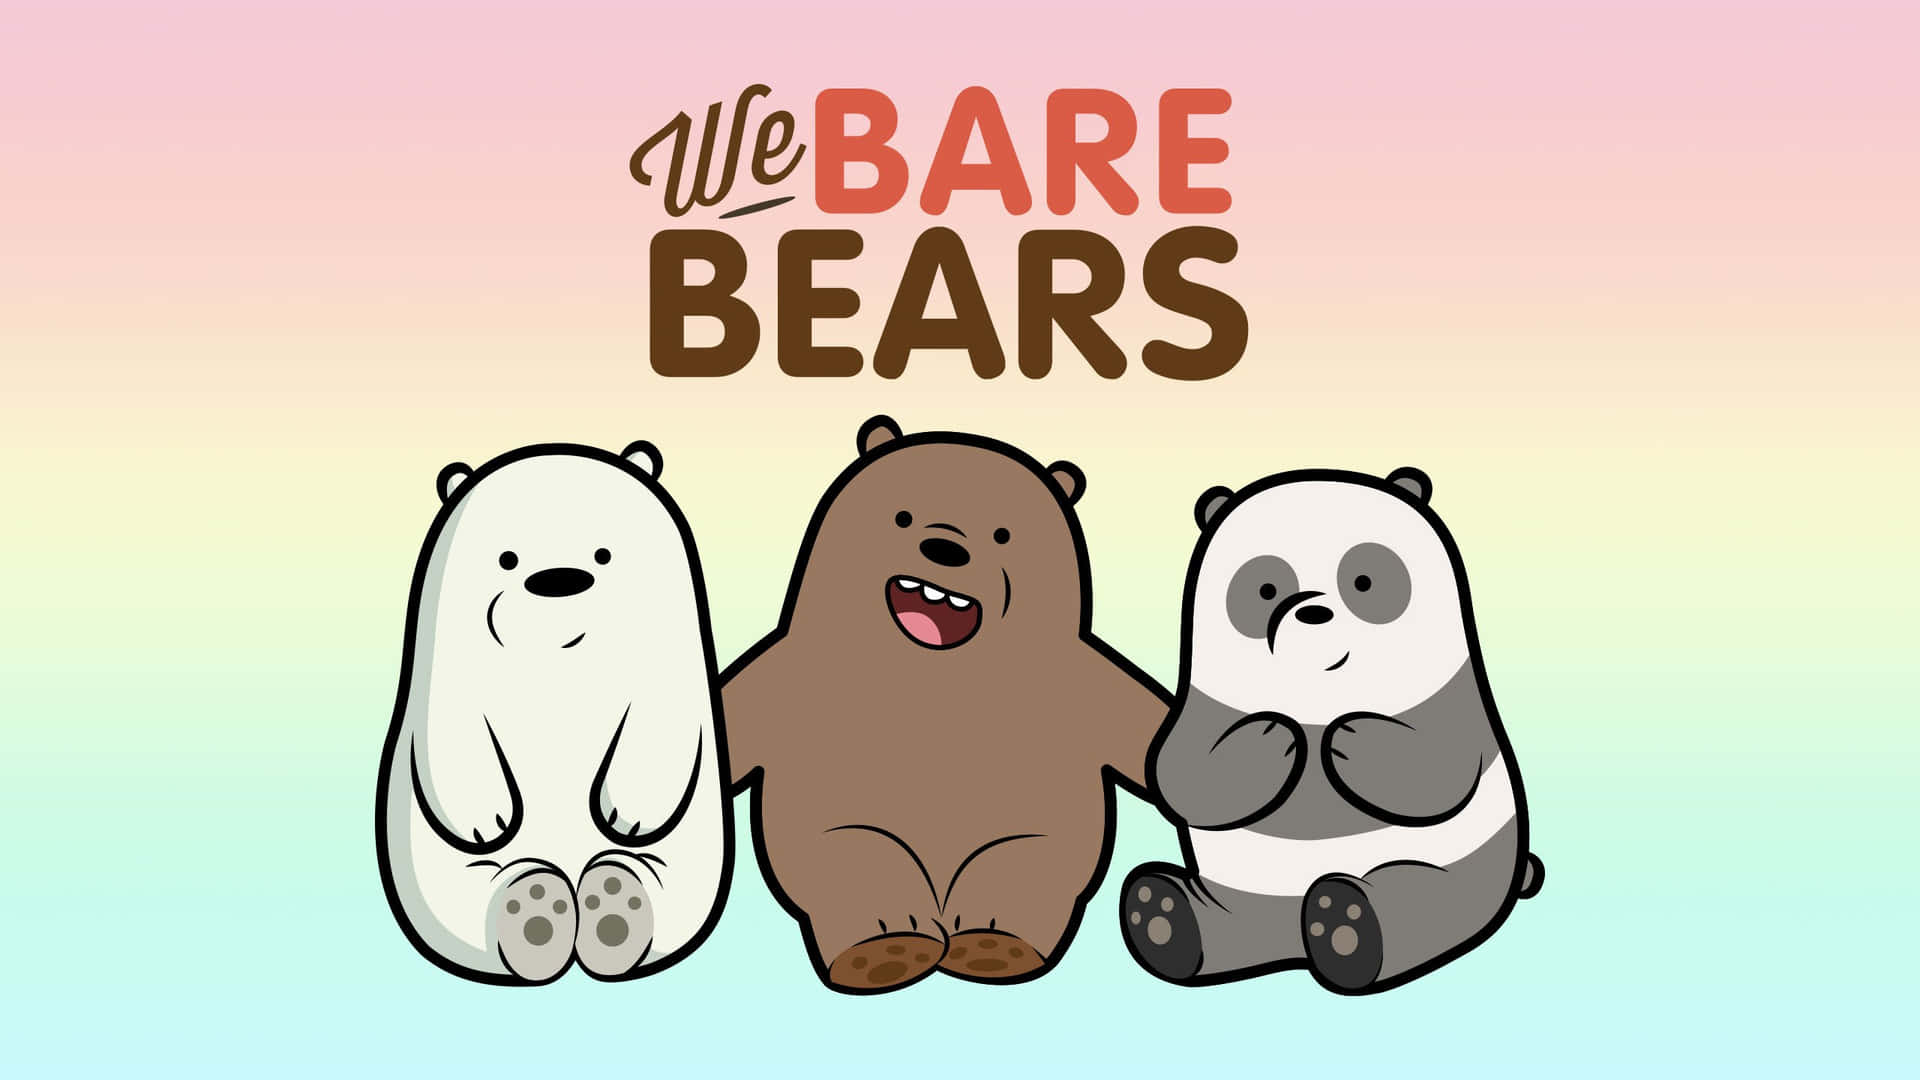 Join Ice Bear, Panda, and Grizzly on their Adventure!